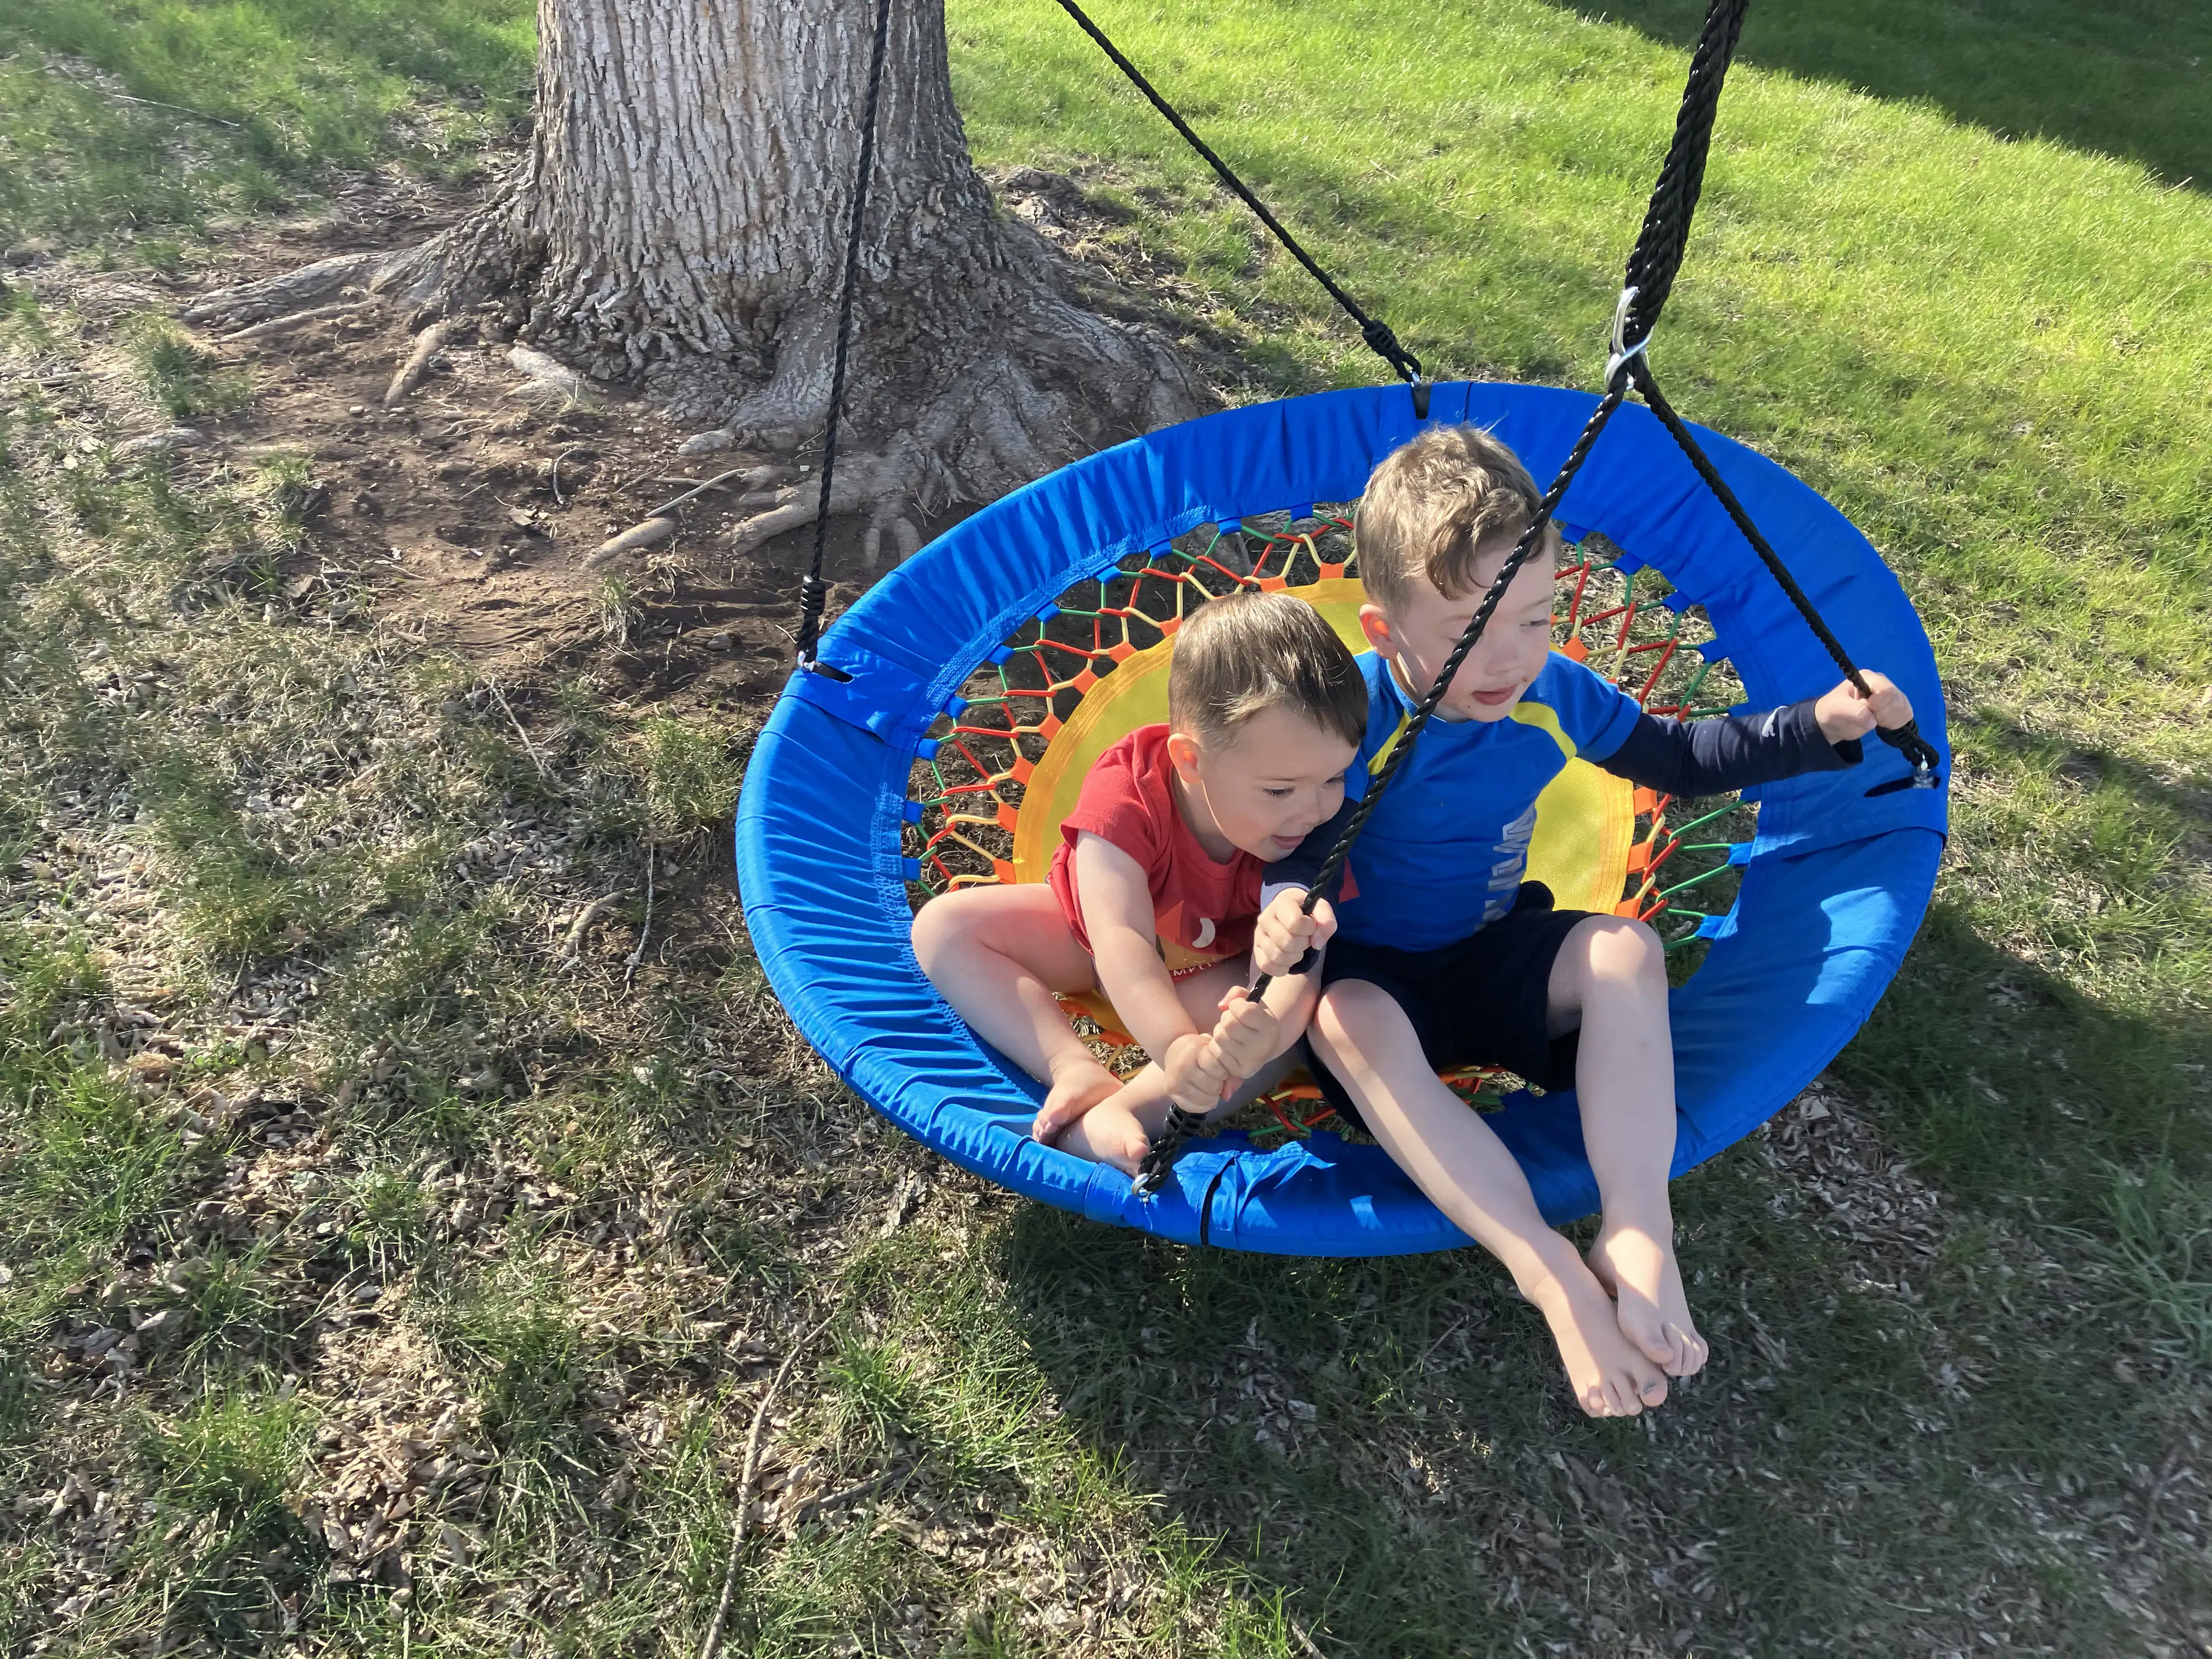 Graham and Royal on a blue and yellow trampoline swing under our Ash tree.